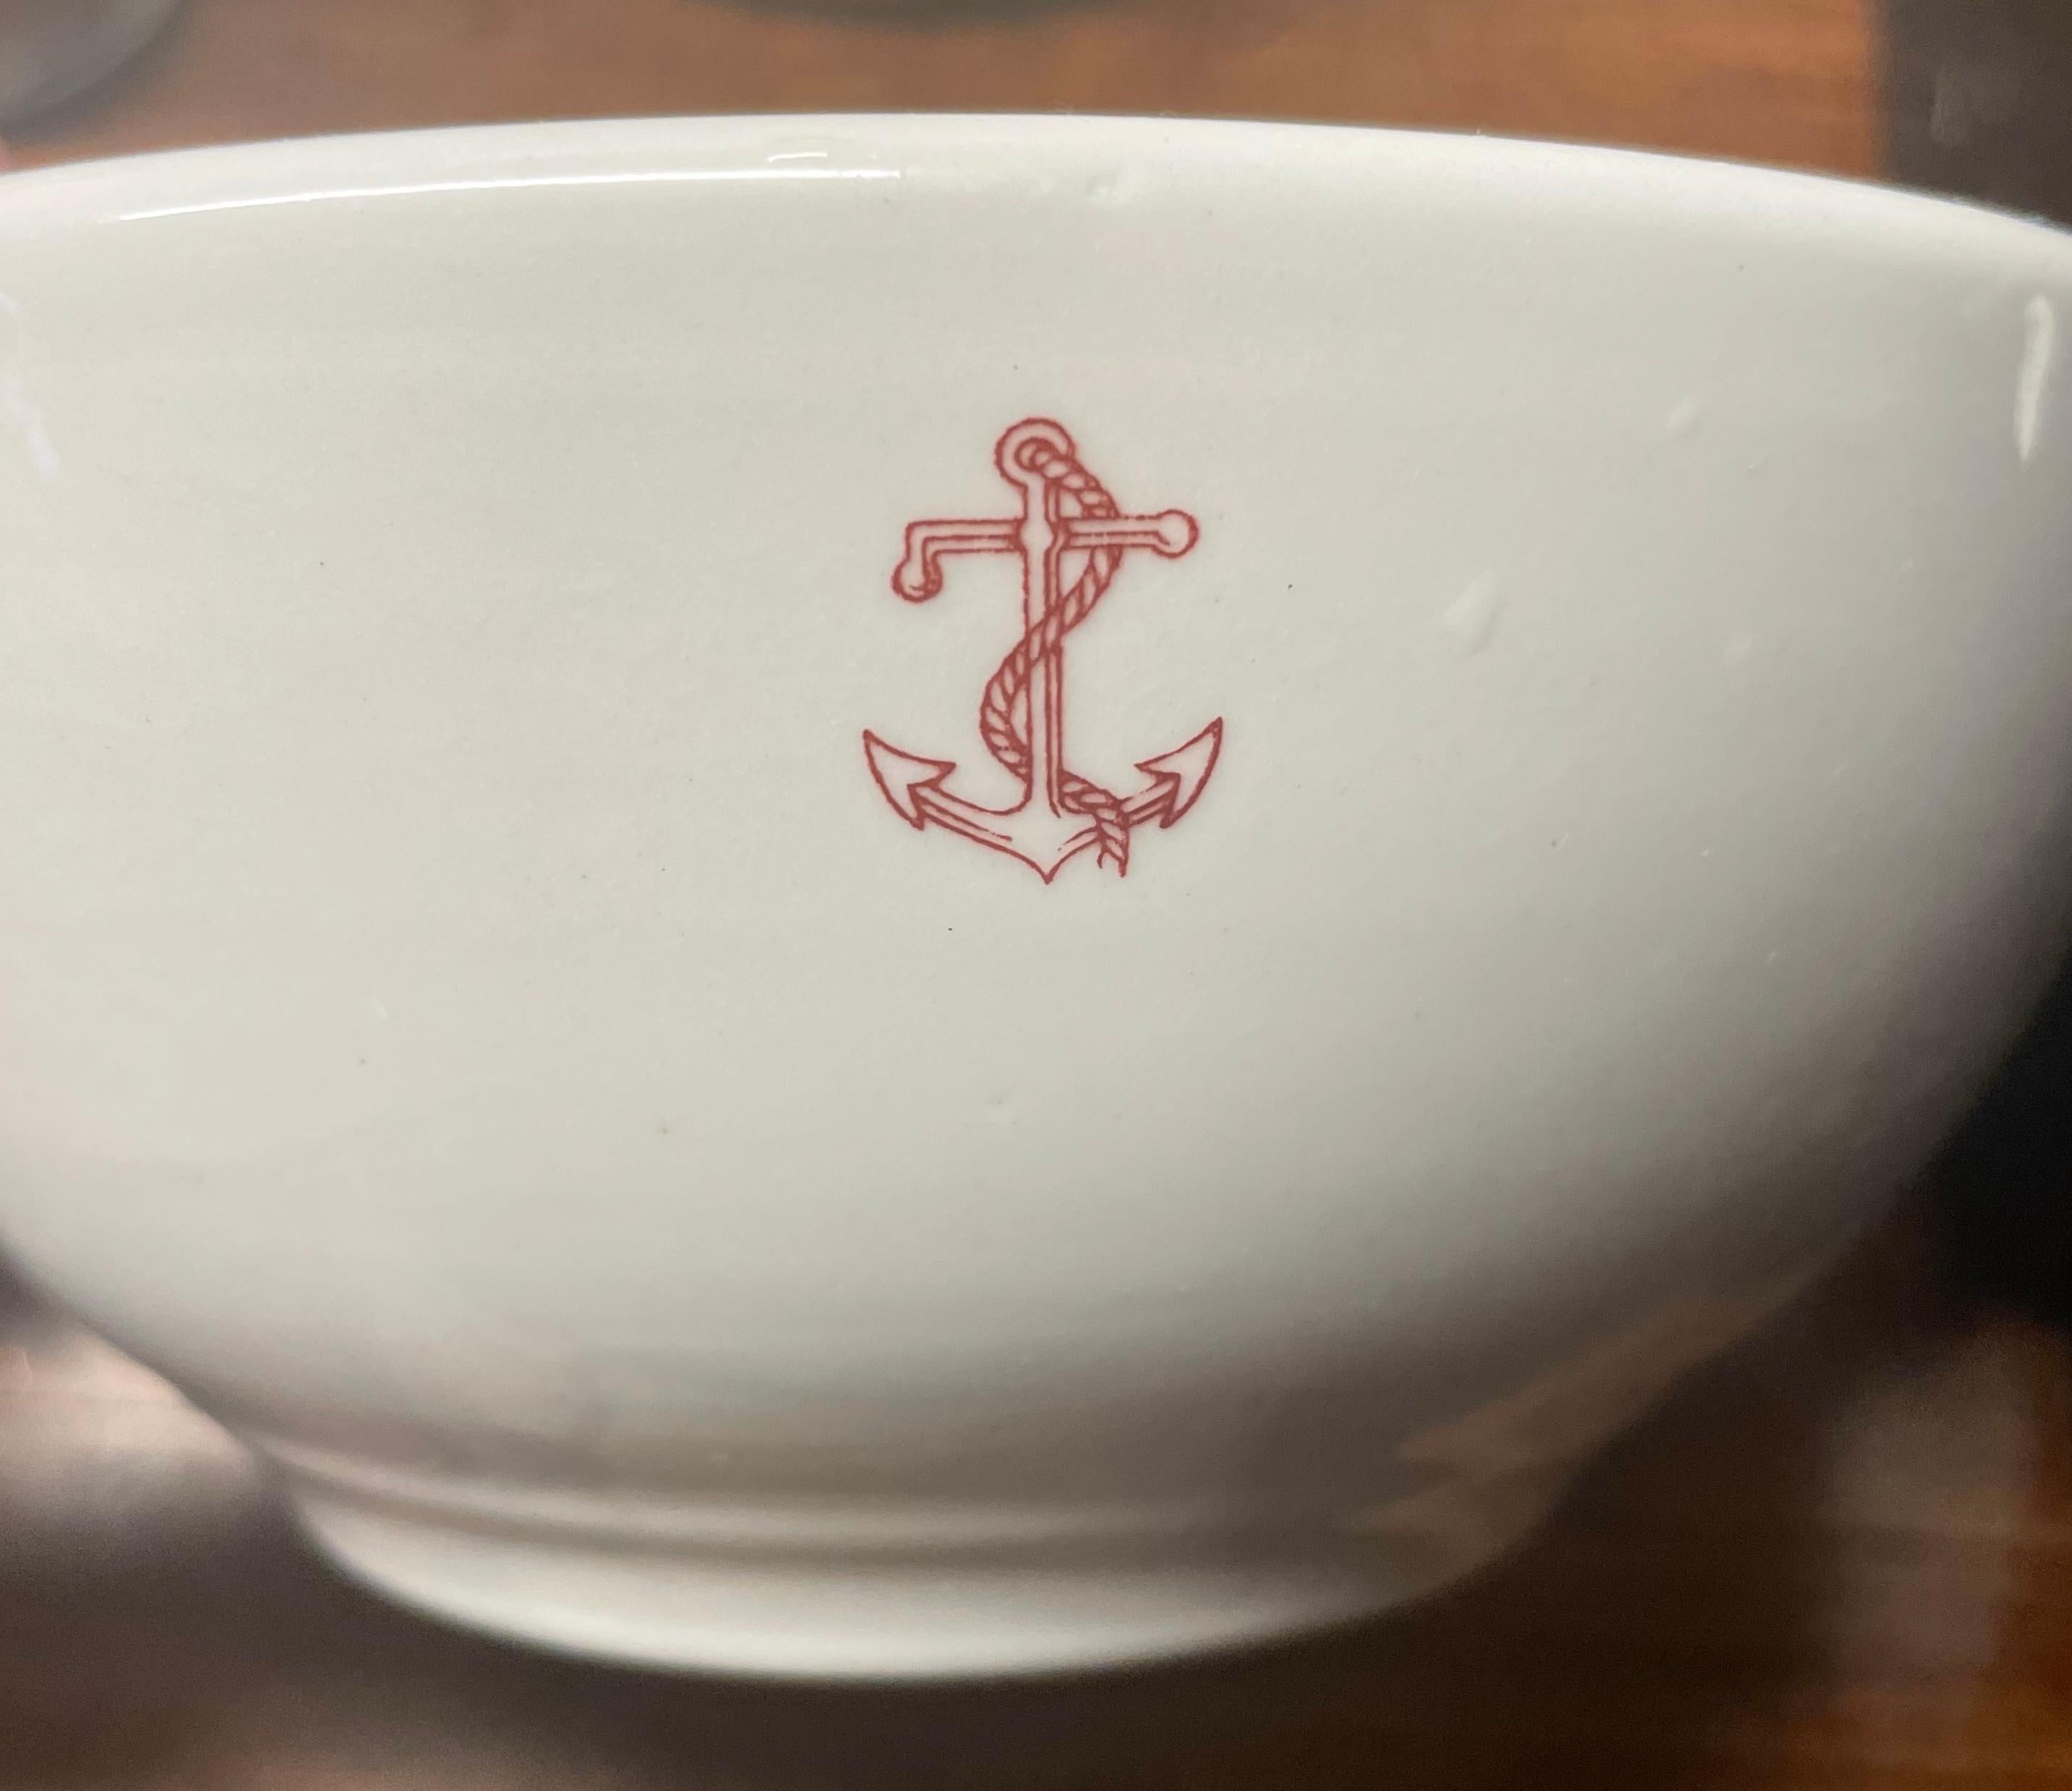 Set of Italian Navy spaghetti bowls. Six Italian ceramic porcelain bowls by Richard Ginori for a delicious pasta primi; semi indestructible bowls for cereal for your corps of rough and tumble children sailors. All with underglaze marks for Ginori